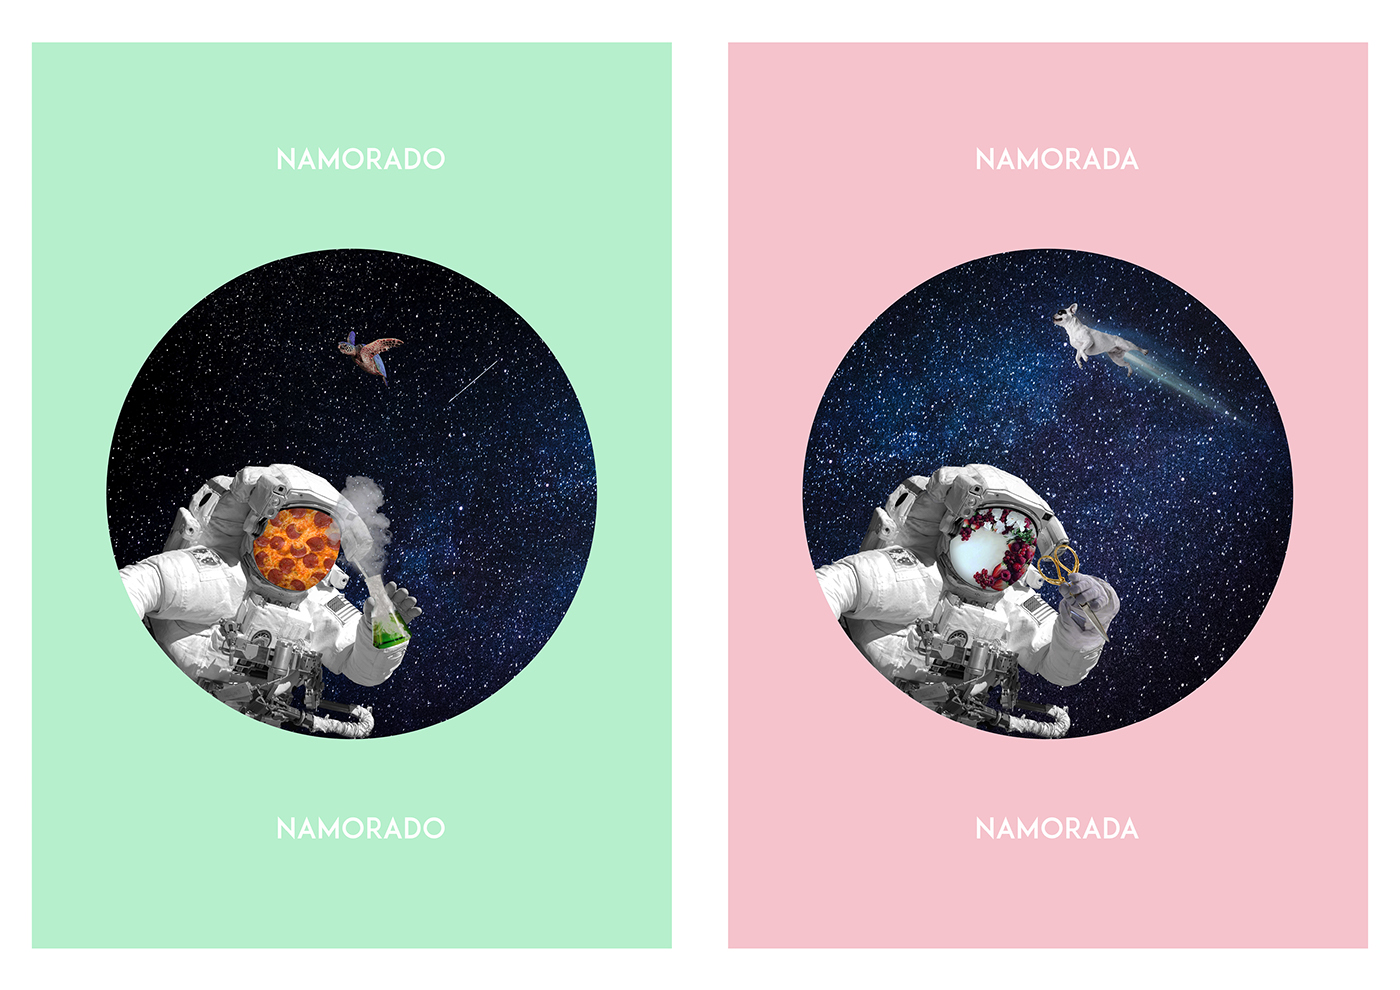 Turtle Pizza astronaut cosmos SKY impossible pastel collage Fun biology